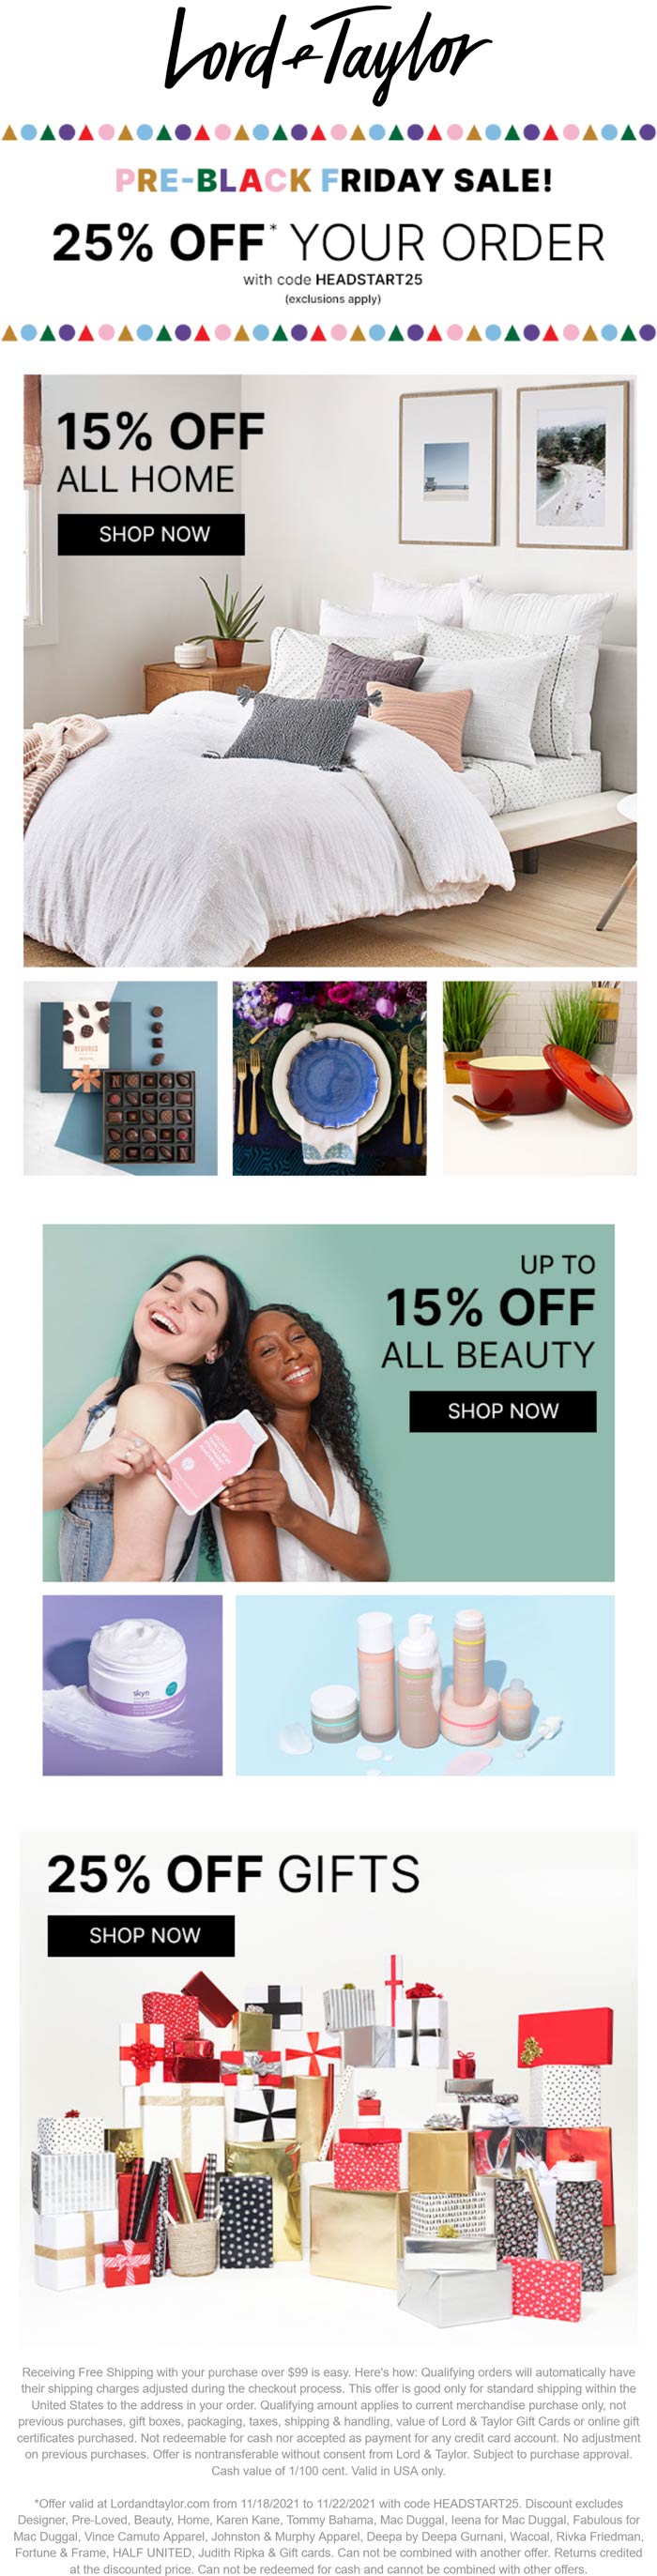 Lord & Taylor stores Coupon  25% off at Lord & Taylor via promo code HEADSTART25 #lordtaylor 